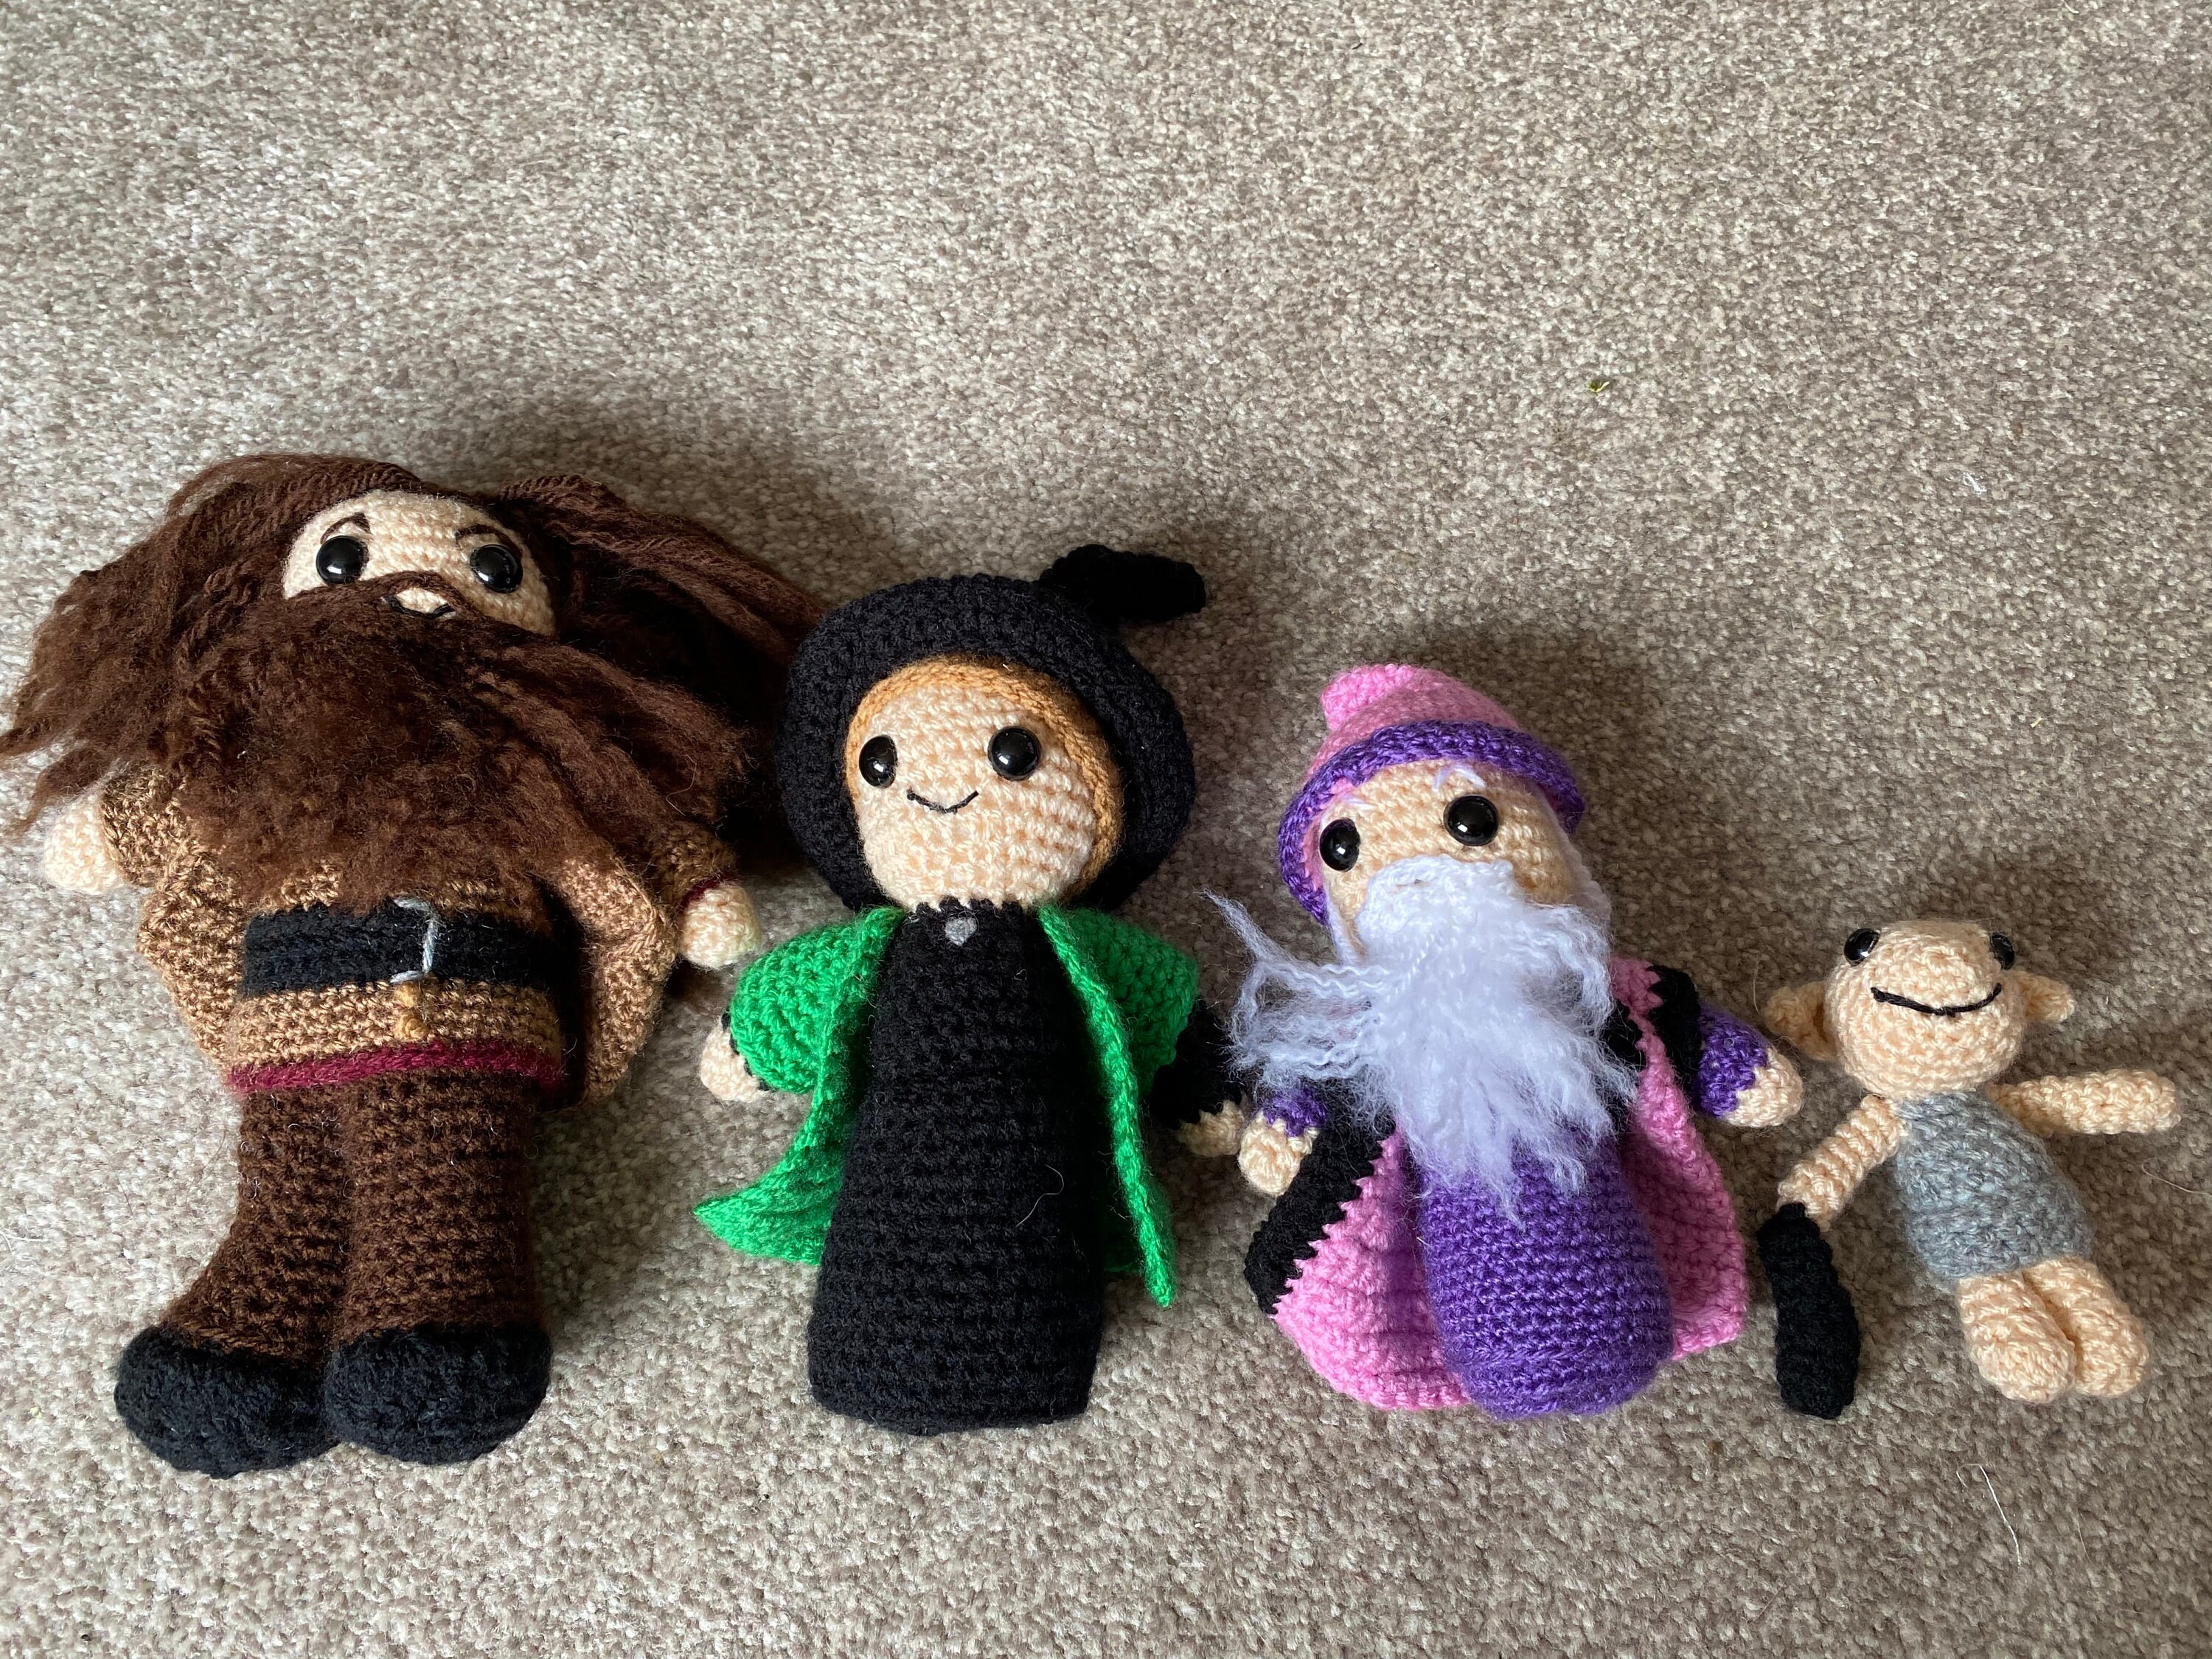 Meet Harry Potter™. Each detail, from the characteristically untidy ha, amigurumis crochet